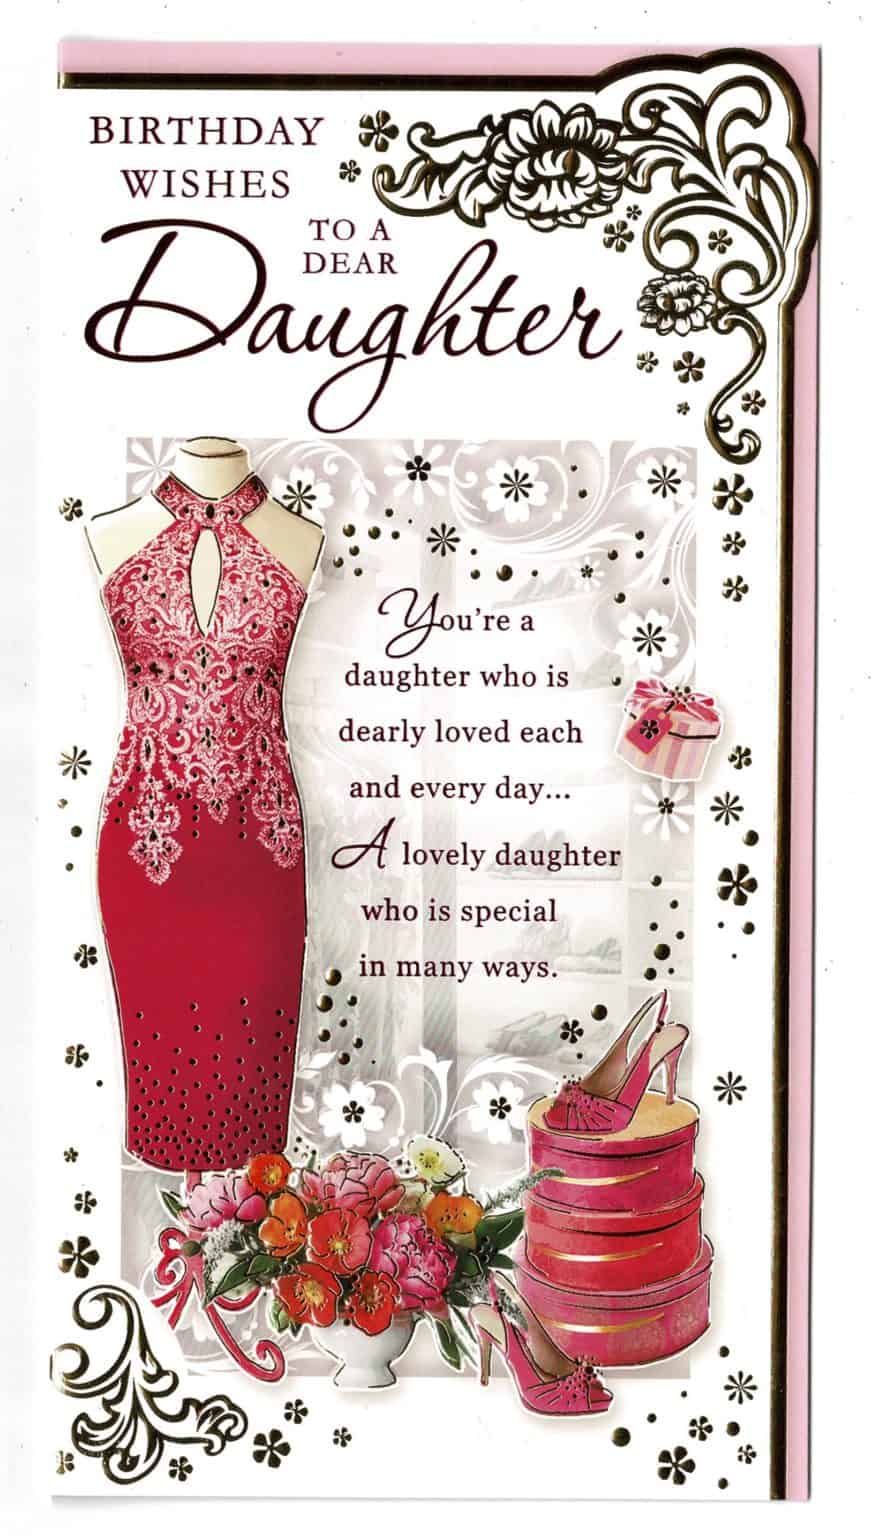 Daughter Birthday Card With Sentiment Verse 'Birthday Wishes To A Dear ...